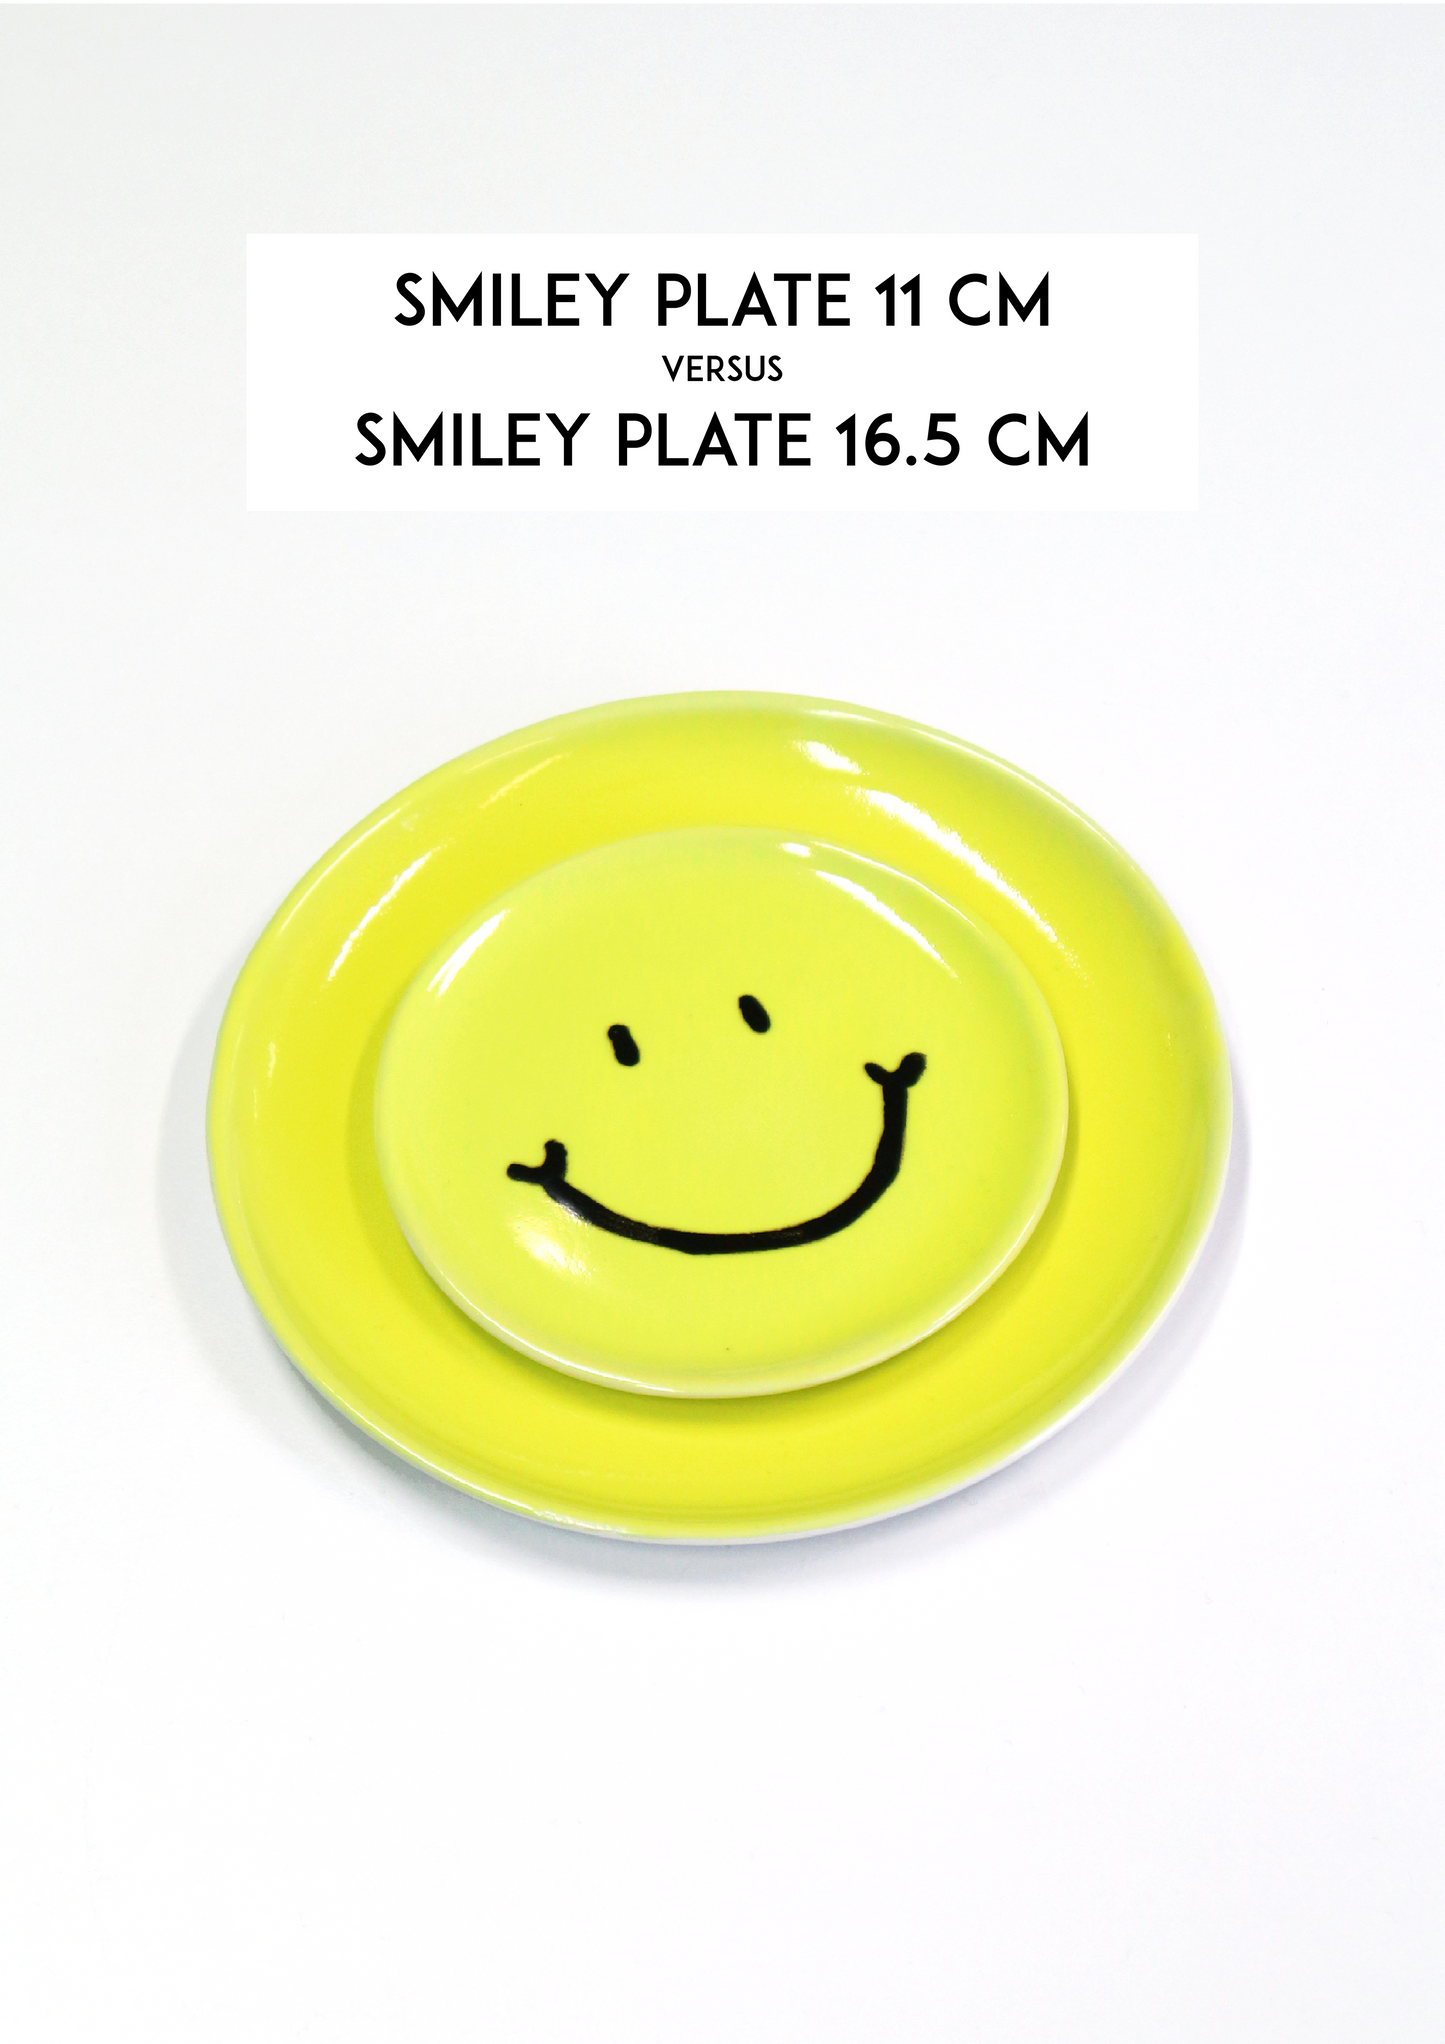 Smiley plate 16.5cm